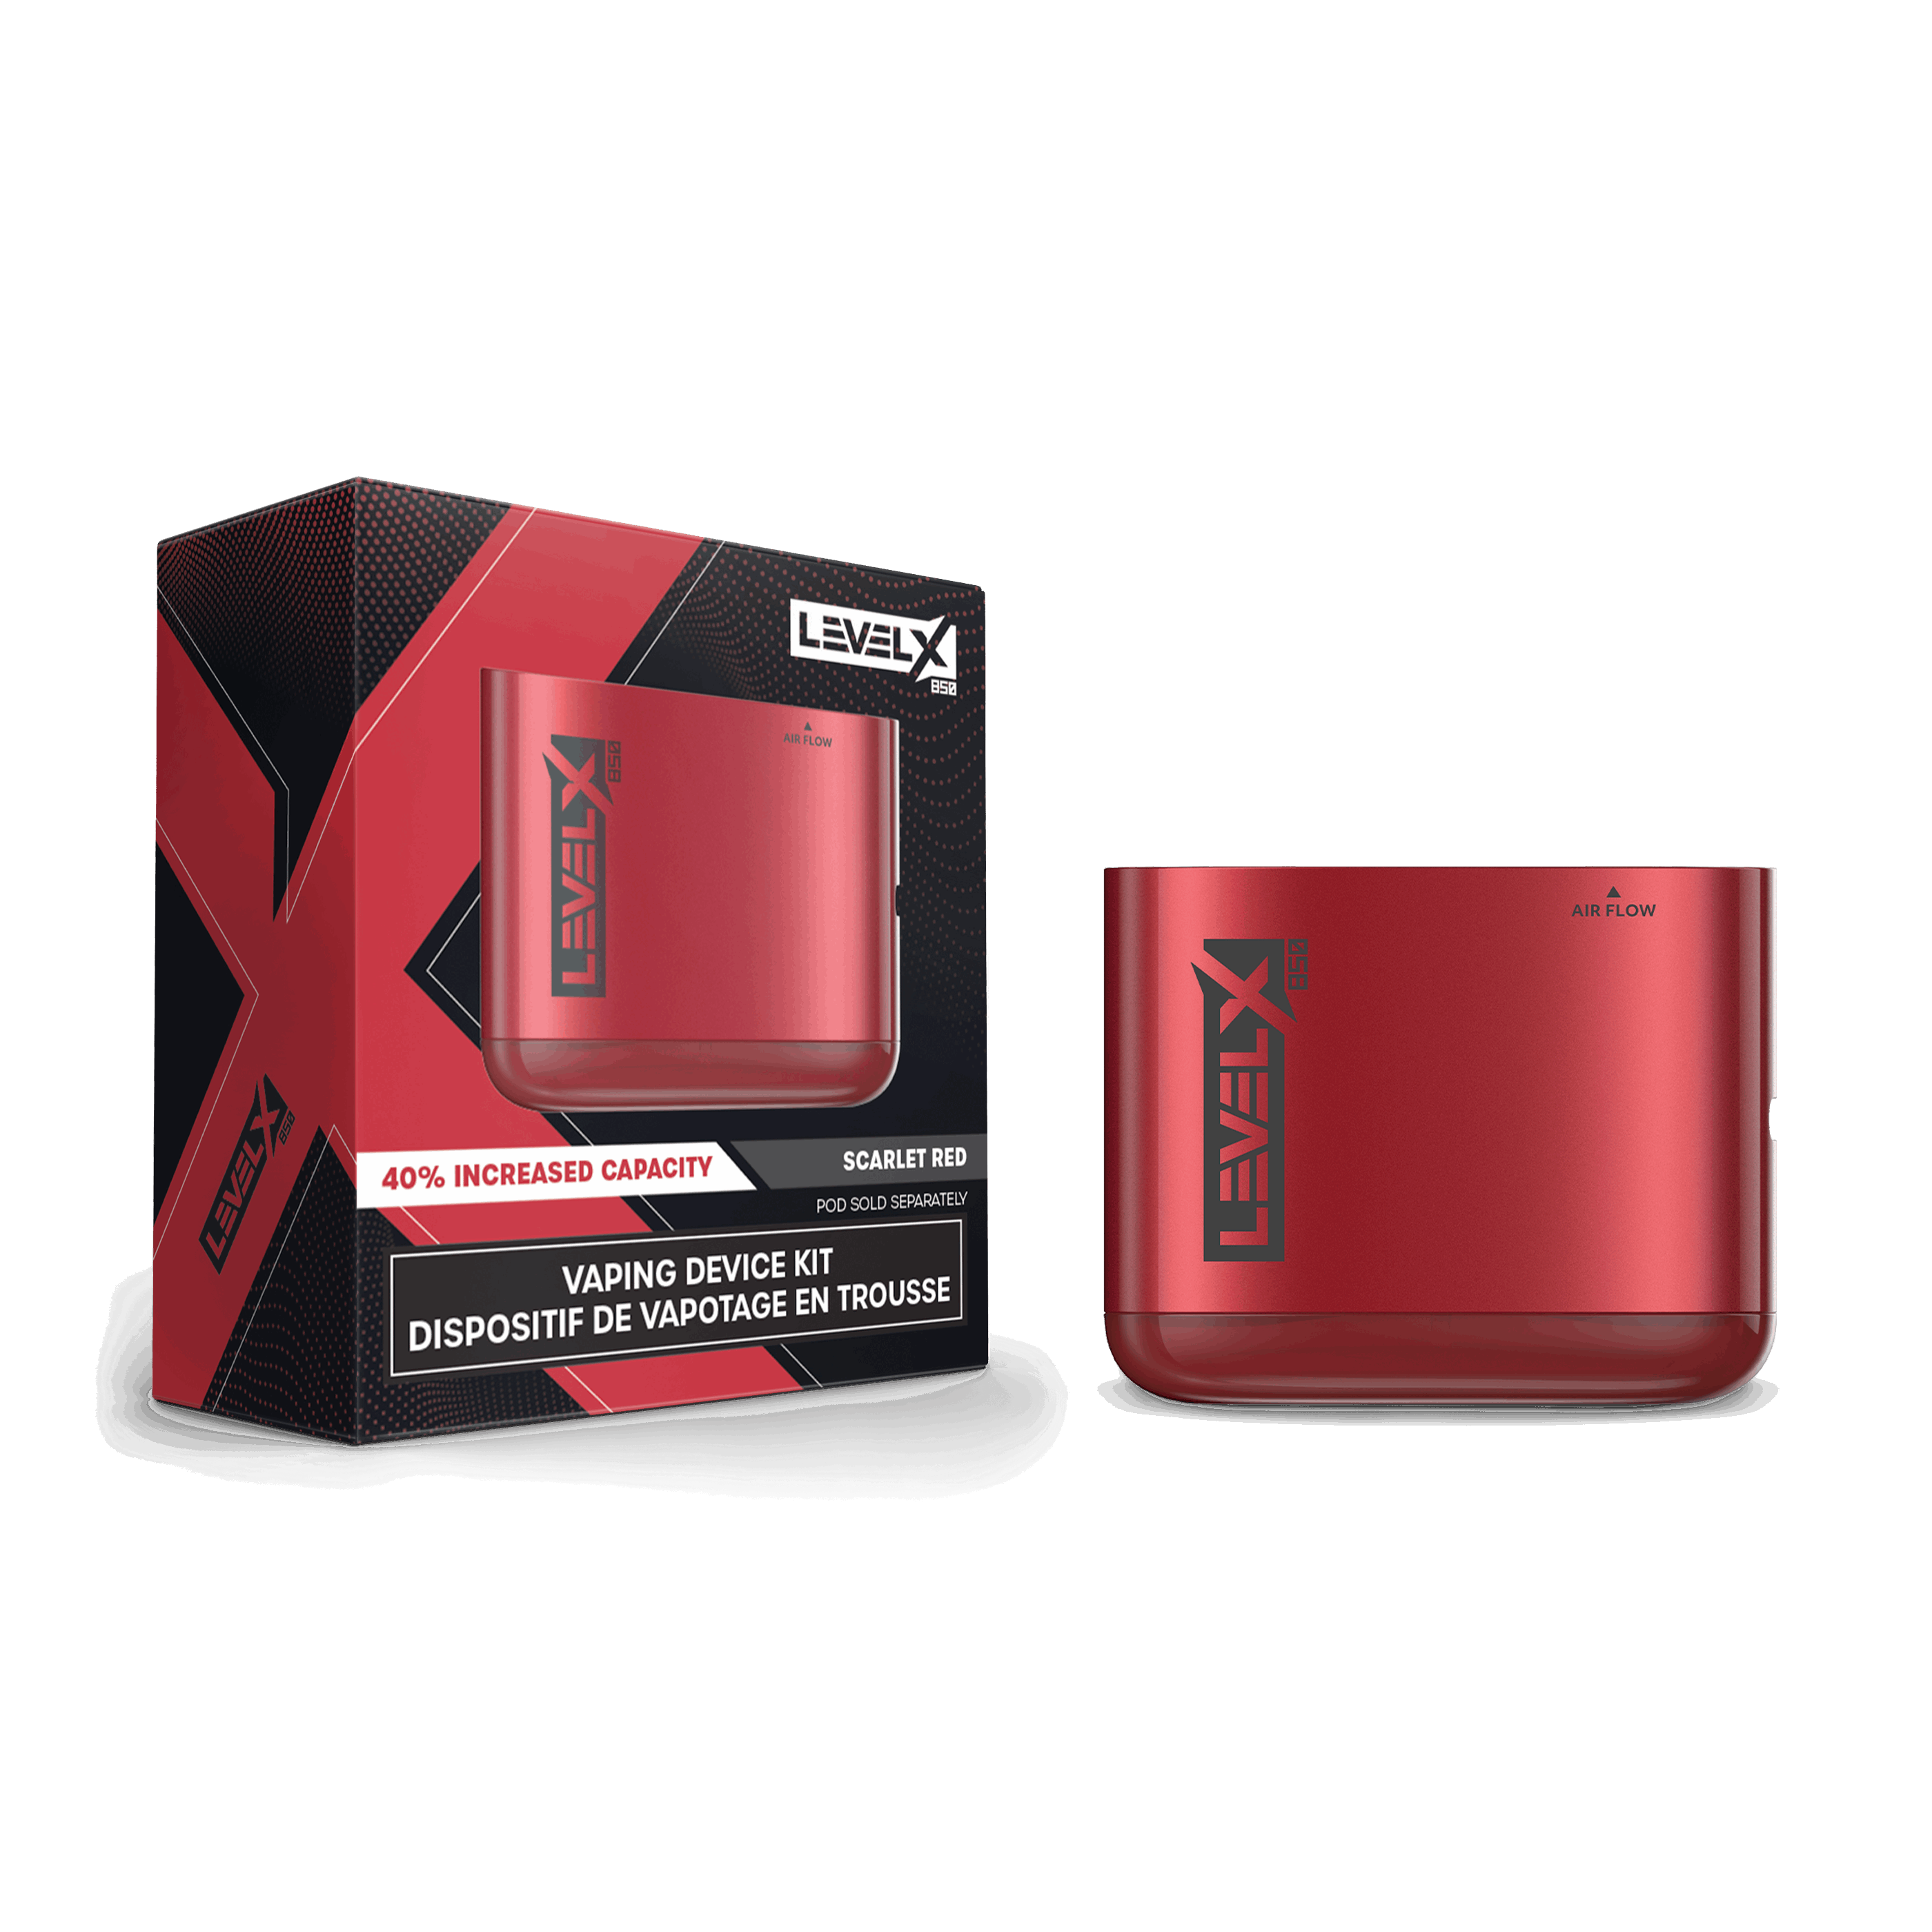 Flavour Beast Level X Device Kit 850 - Scarlet Red